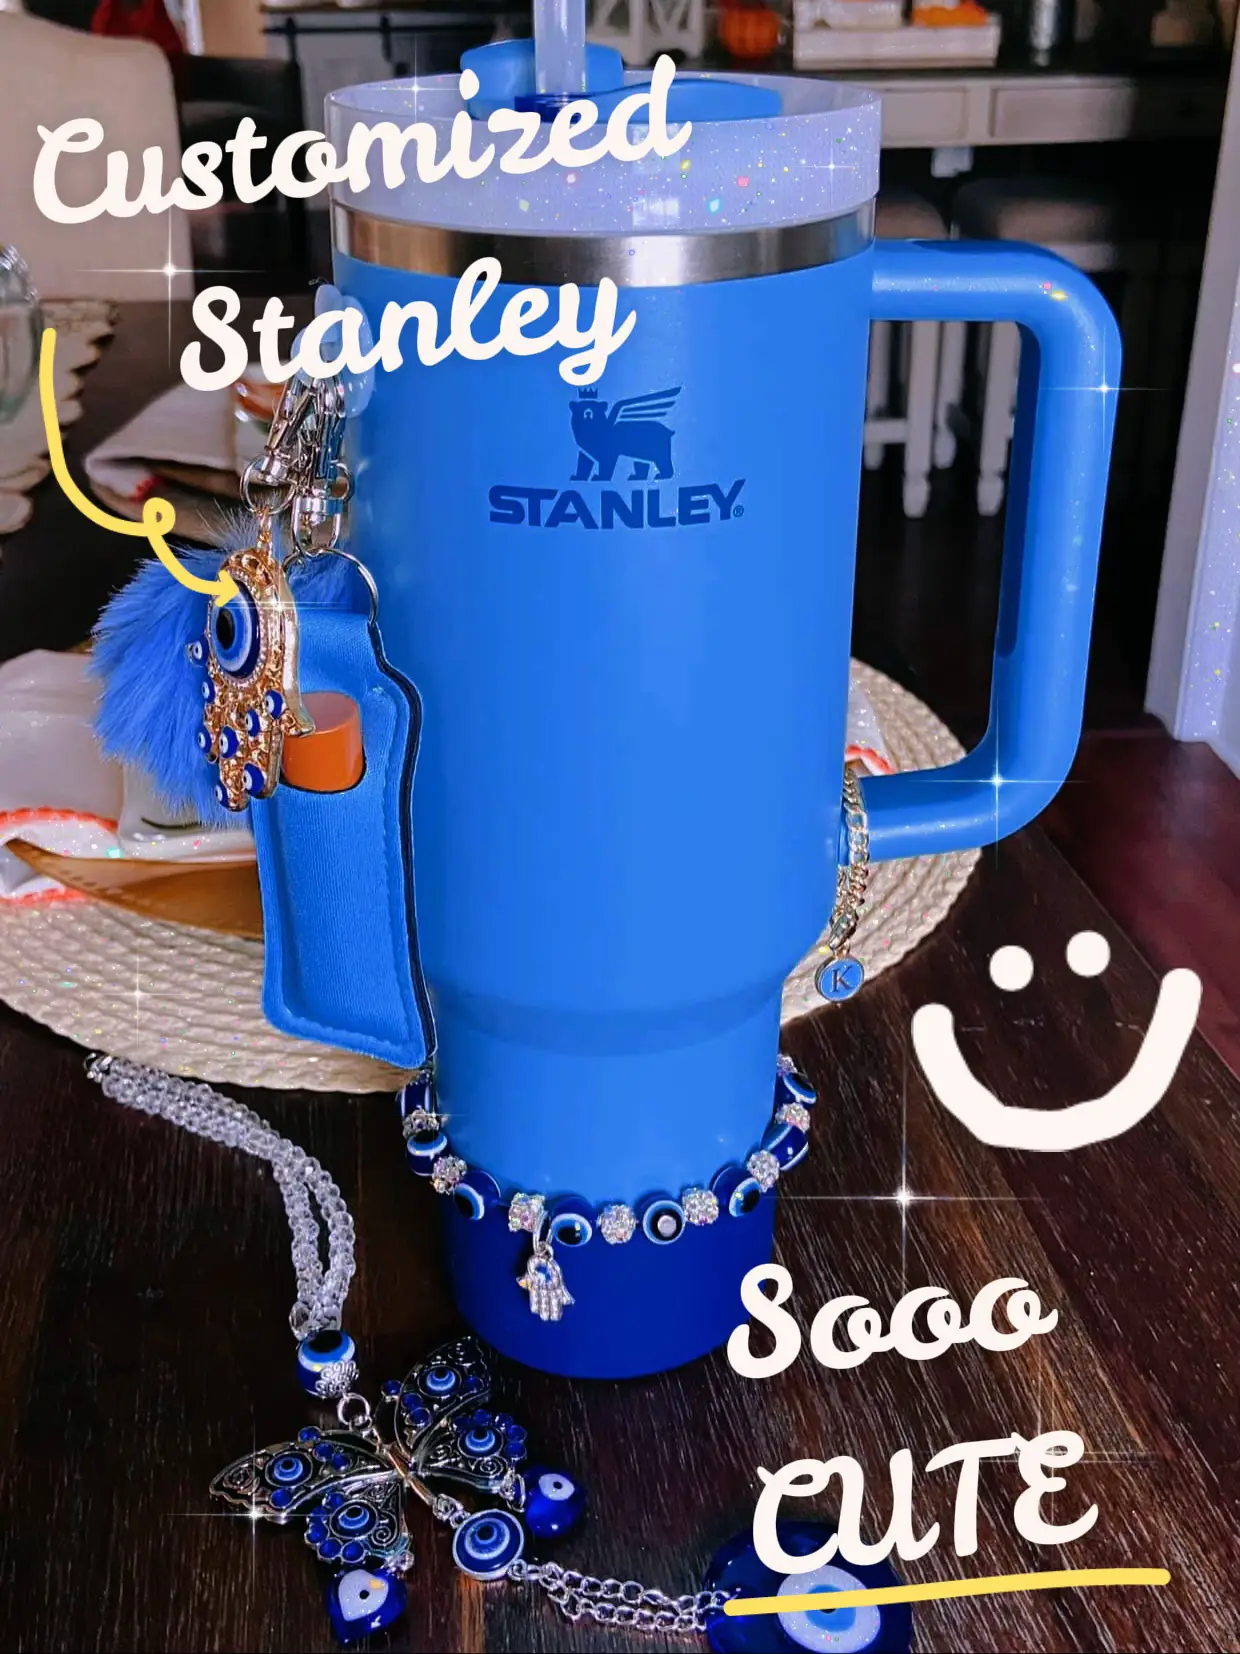 Engraved Stanley Cup Adventure Quencher 2.0 Stanley Personalized Engraved  Name Stanley Tumbler 40 Oz Quencher Stanley Gift for Friend Gift 